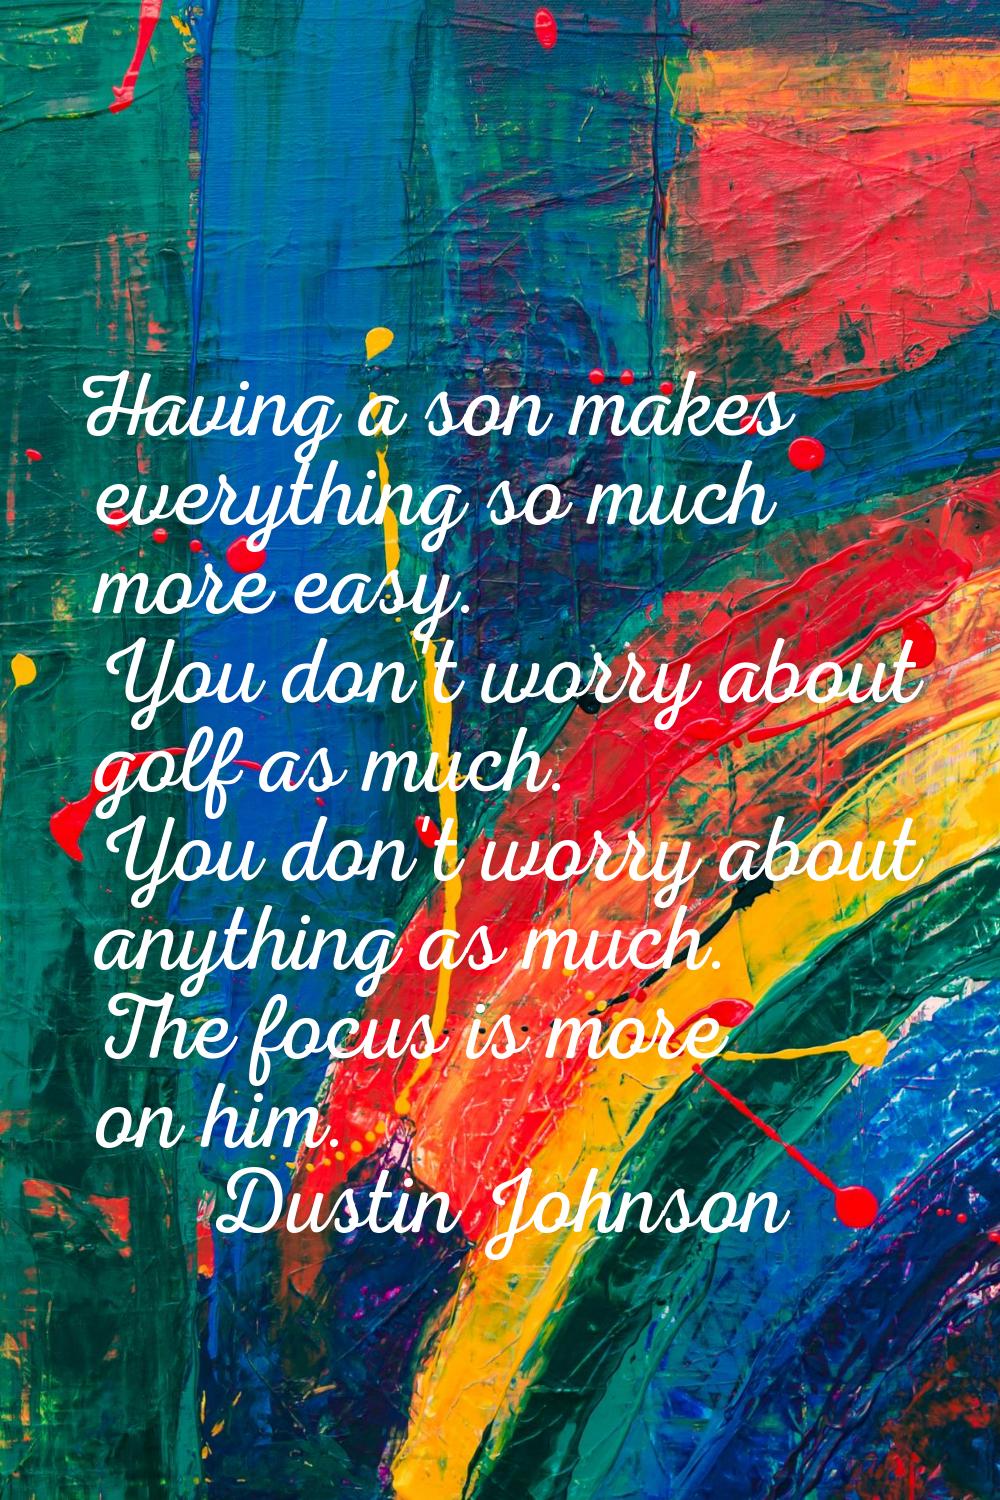 Having a son makes everything so much more easy. You don't worry about golf as much. You don't worr